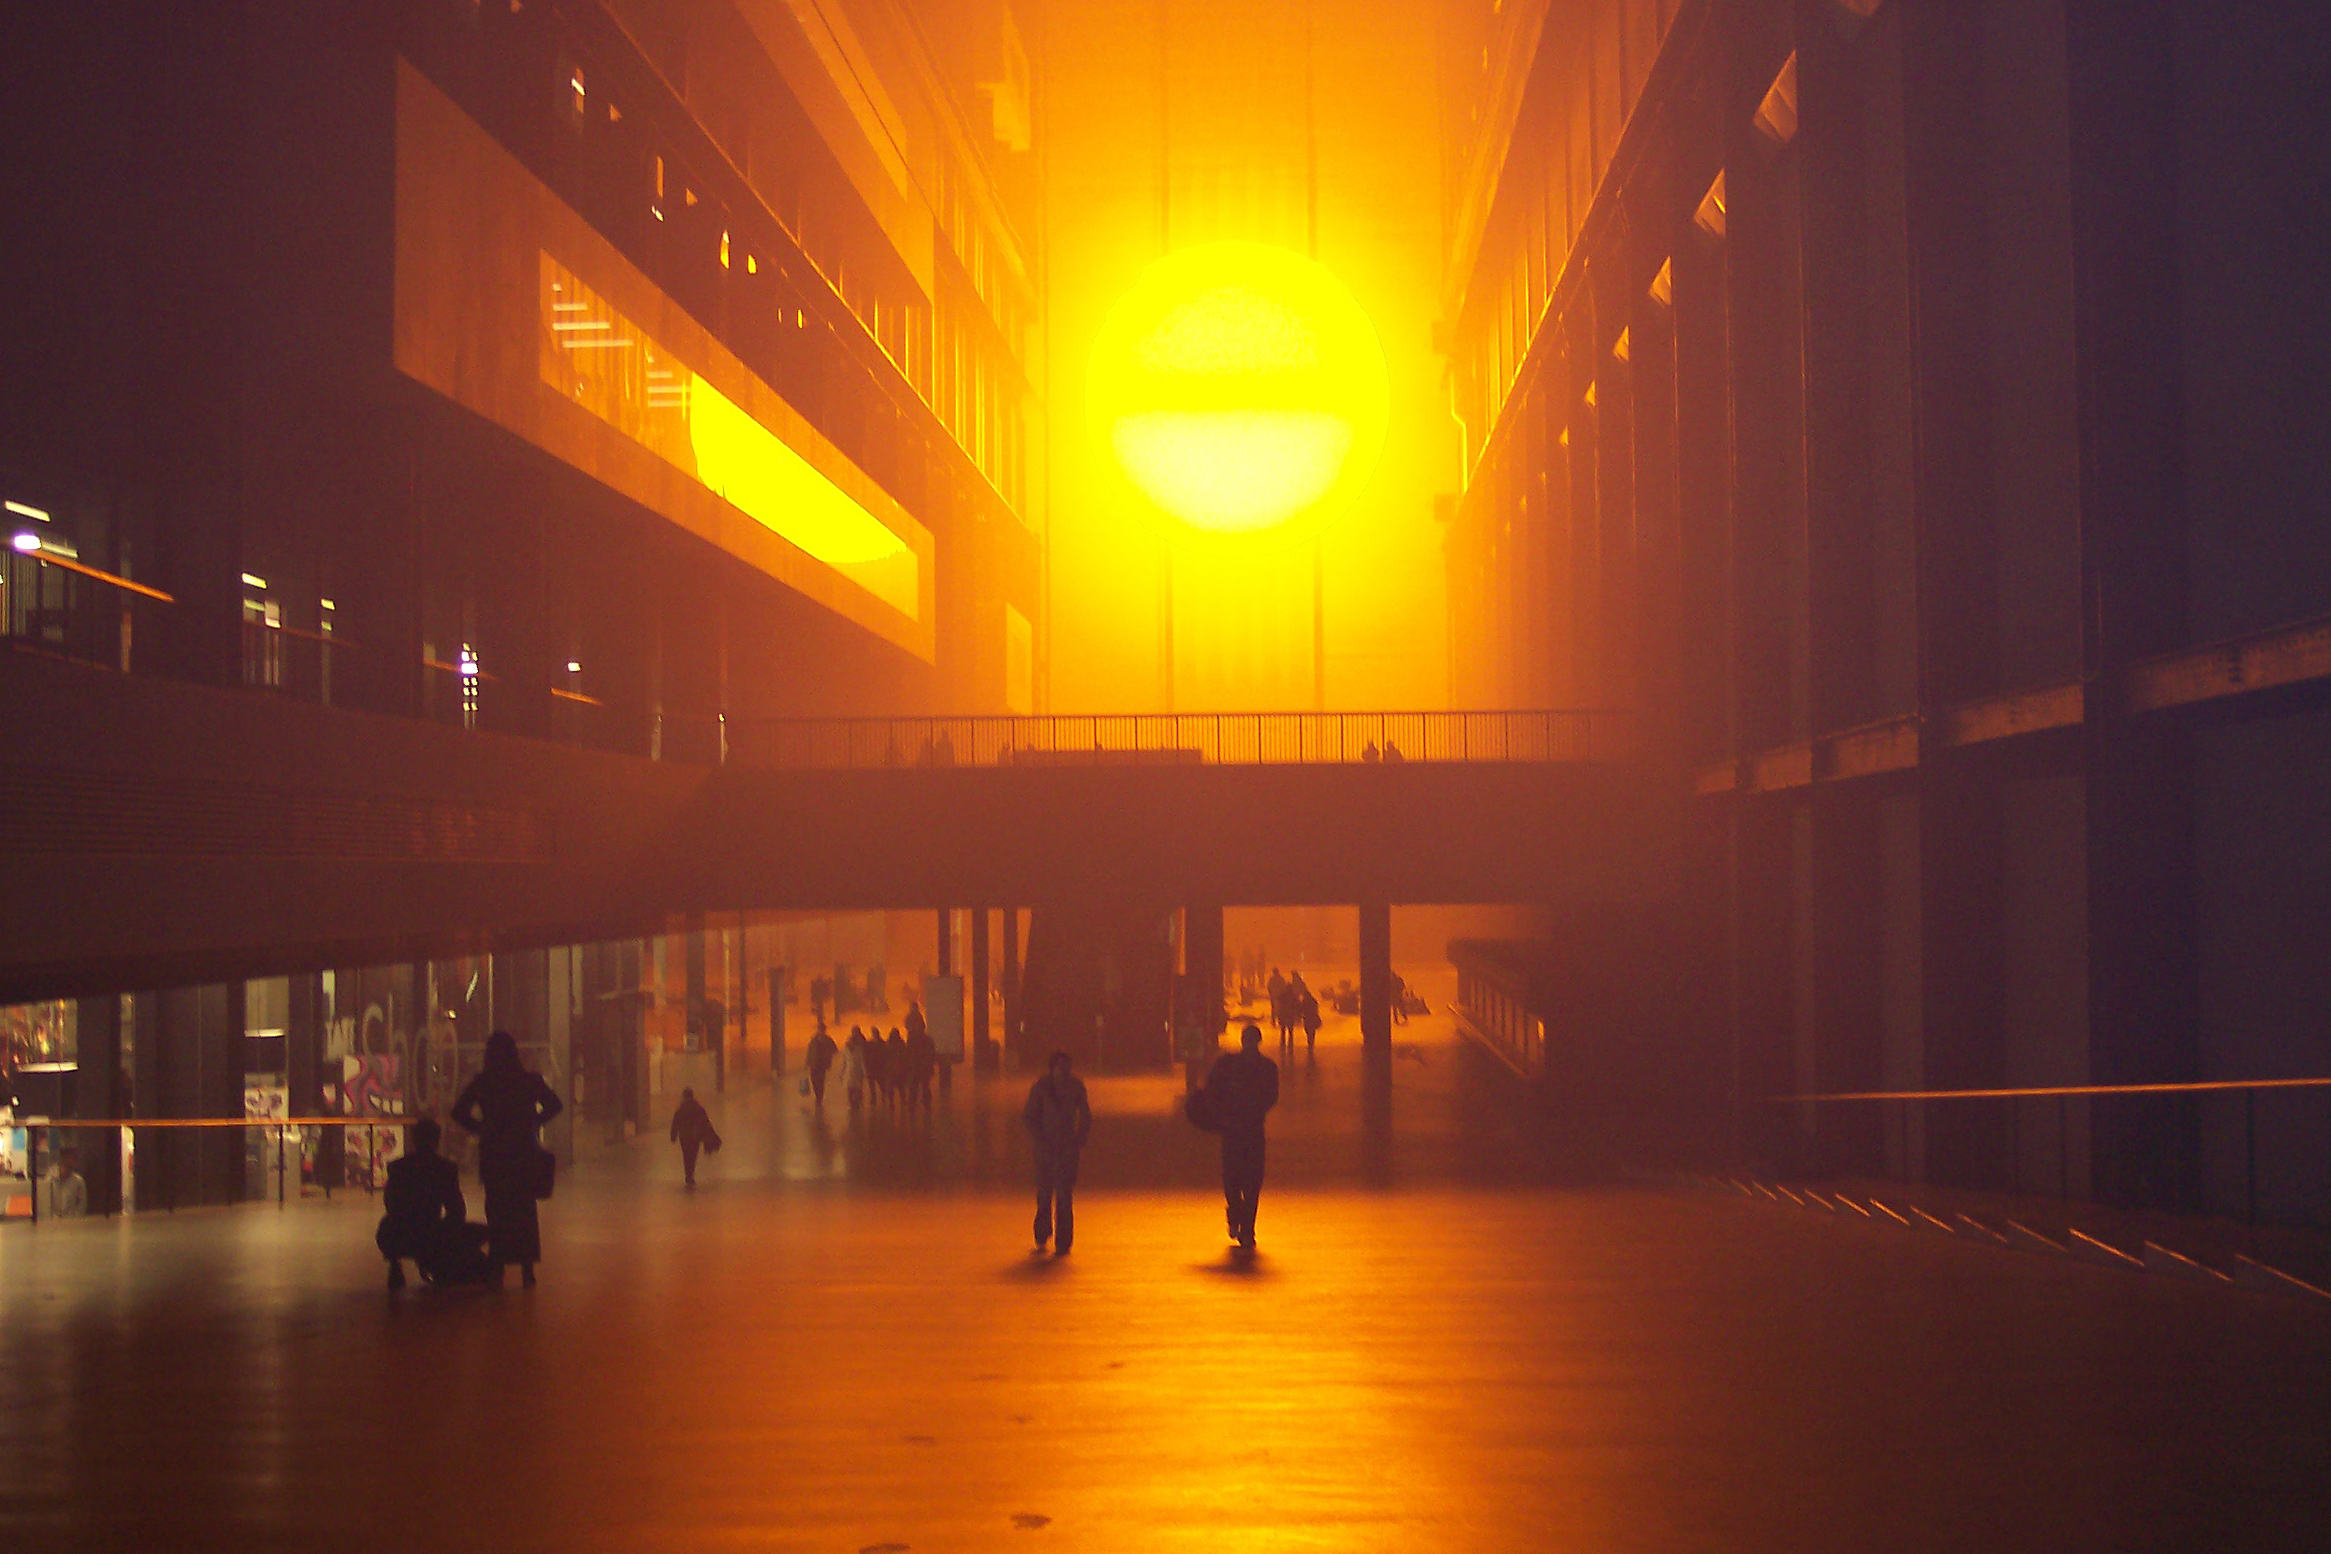 2004_01-08_Olafur-Eliasson_The-Weather-Project-[Tate-Modern]_5_Photograph_James-Bulley.jpg